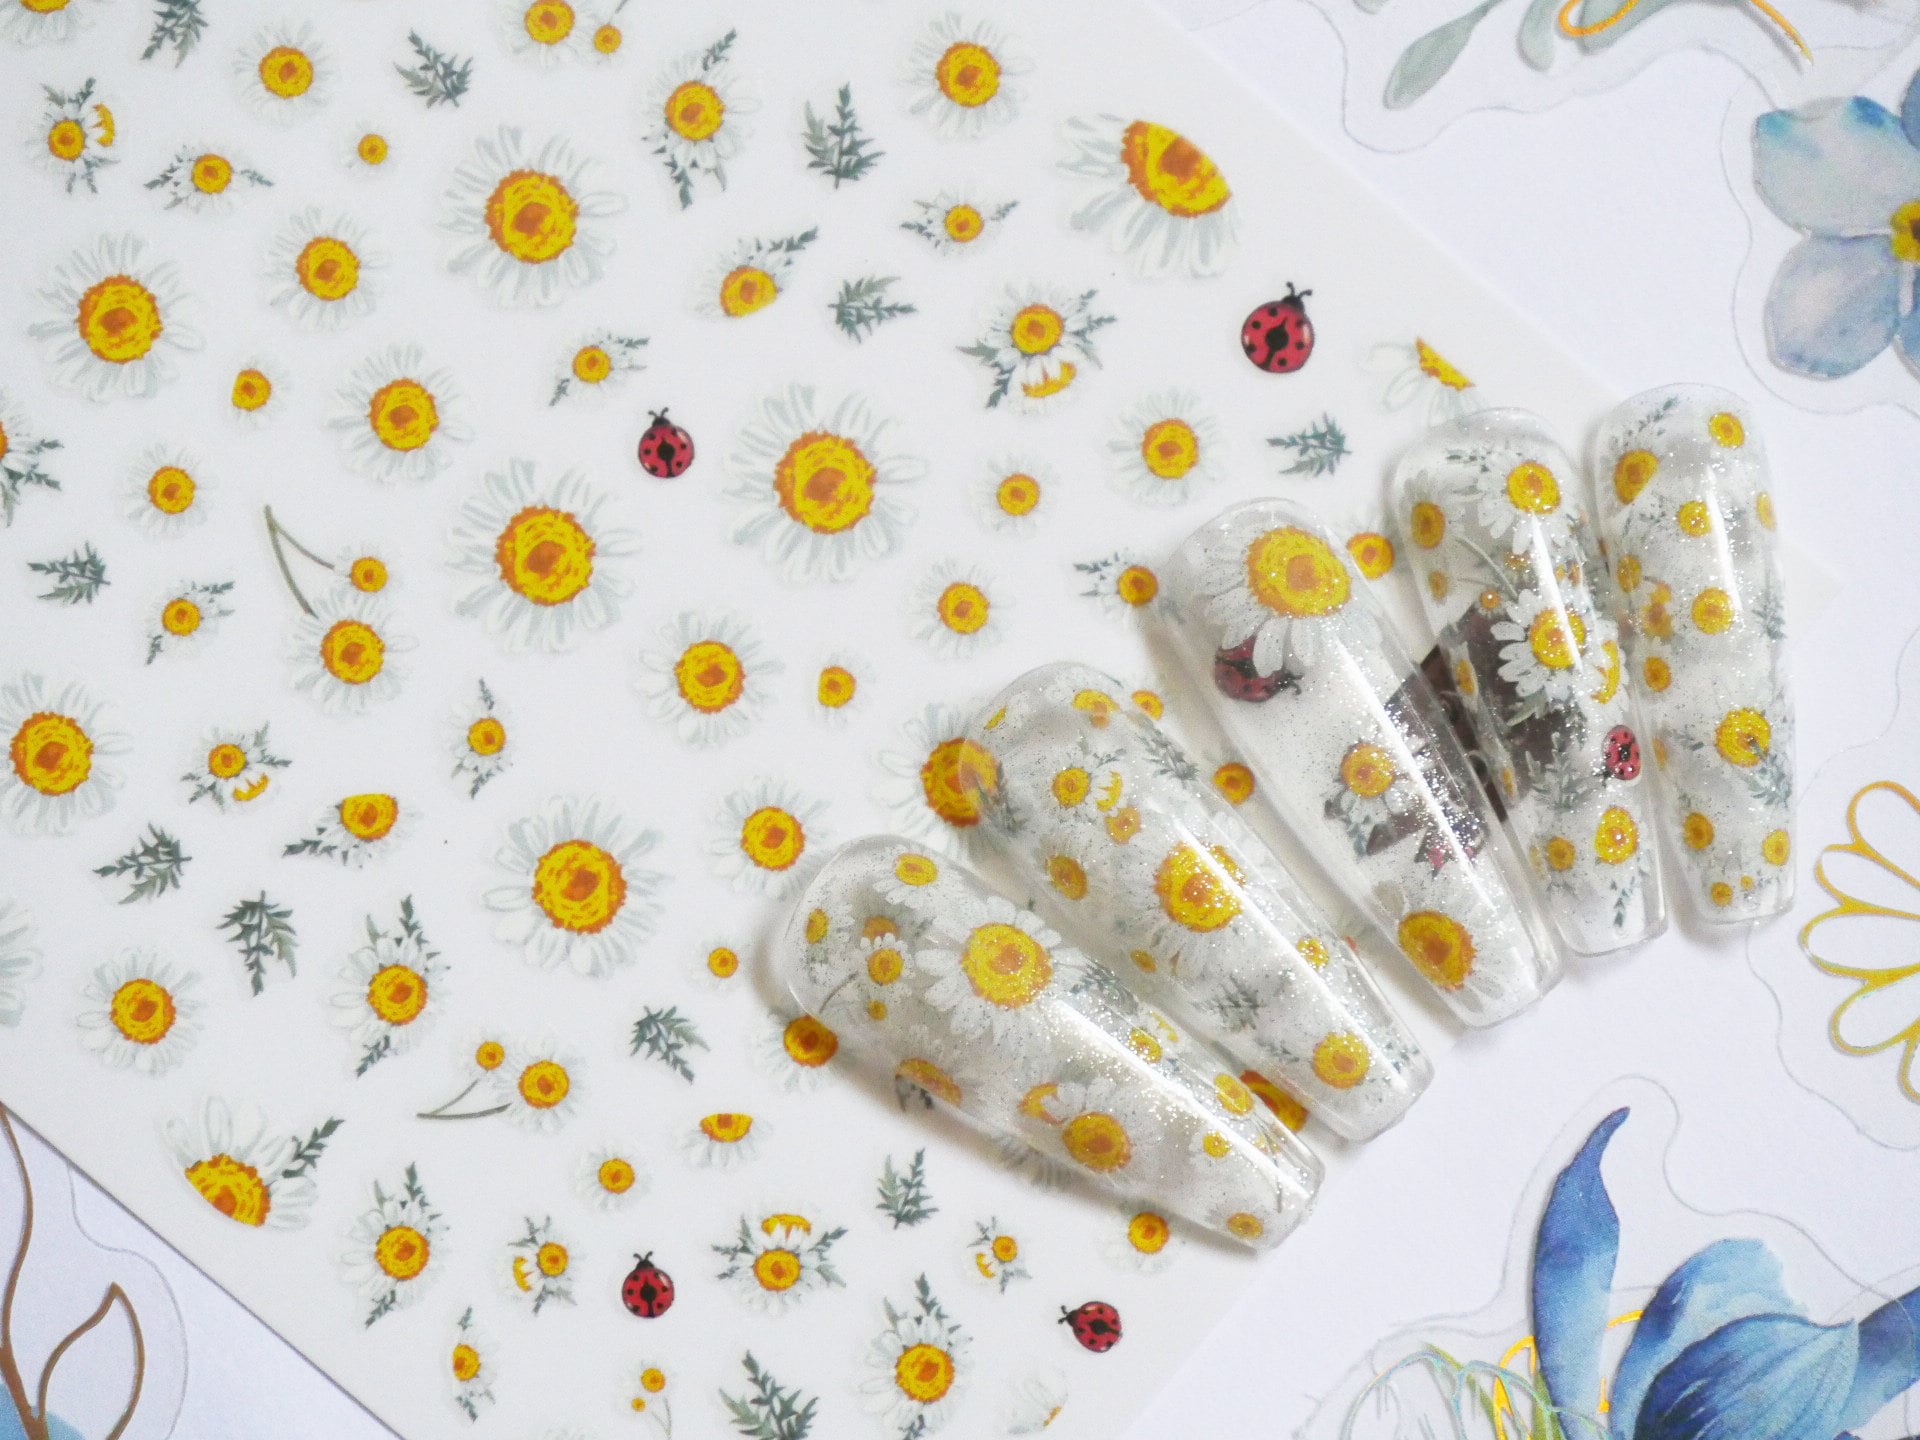 Daisy flower Nail Art Sticker Peel off daisies Stickers/ Beetle Leaf Bouquet white flower Blossom Manicure Nail Supply